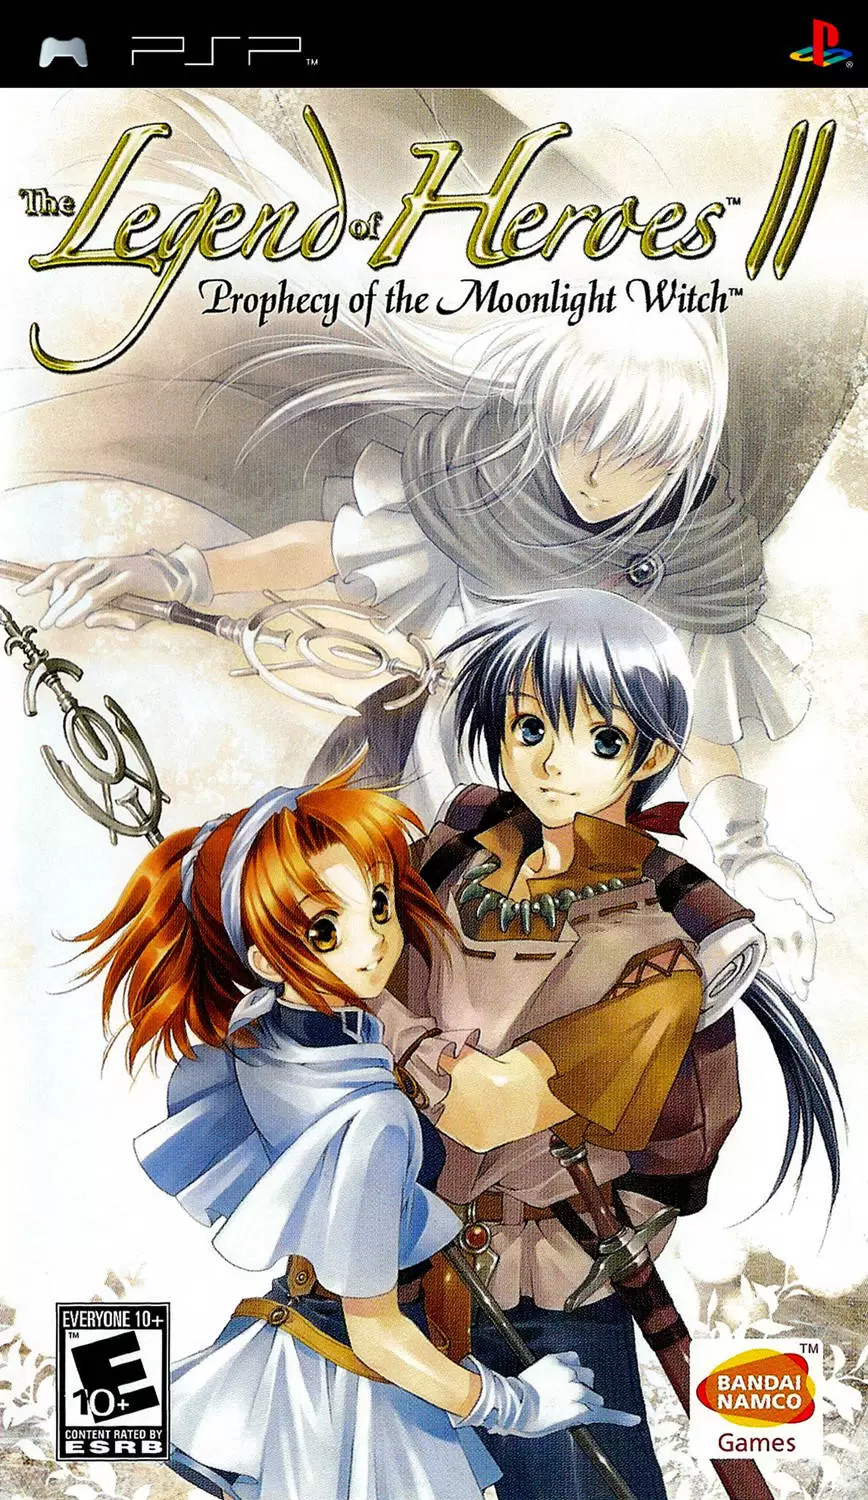 Jeux PSP - The Legend of Heroes II: Prophecy of the Moonlight Witch